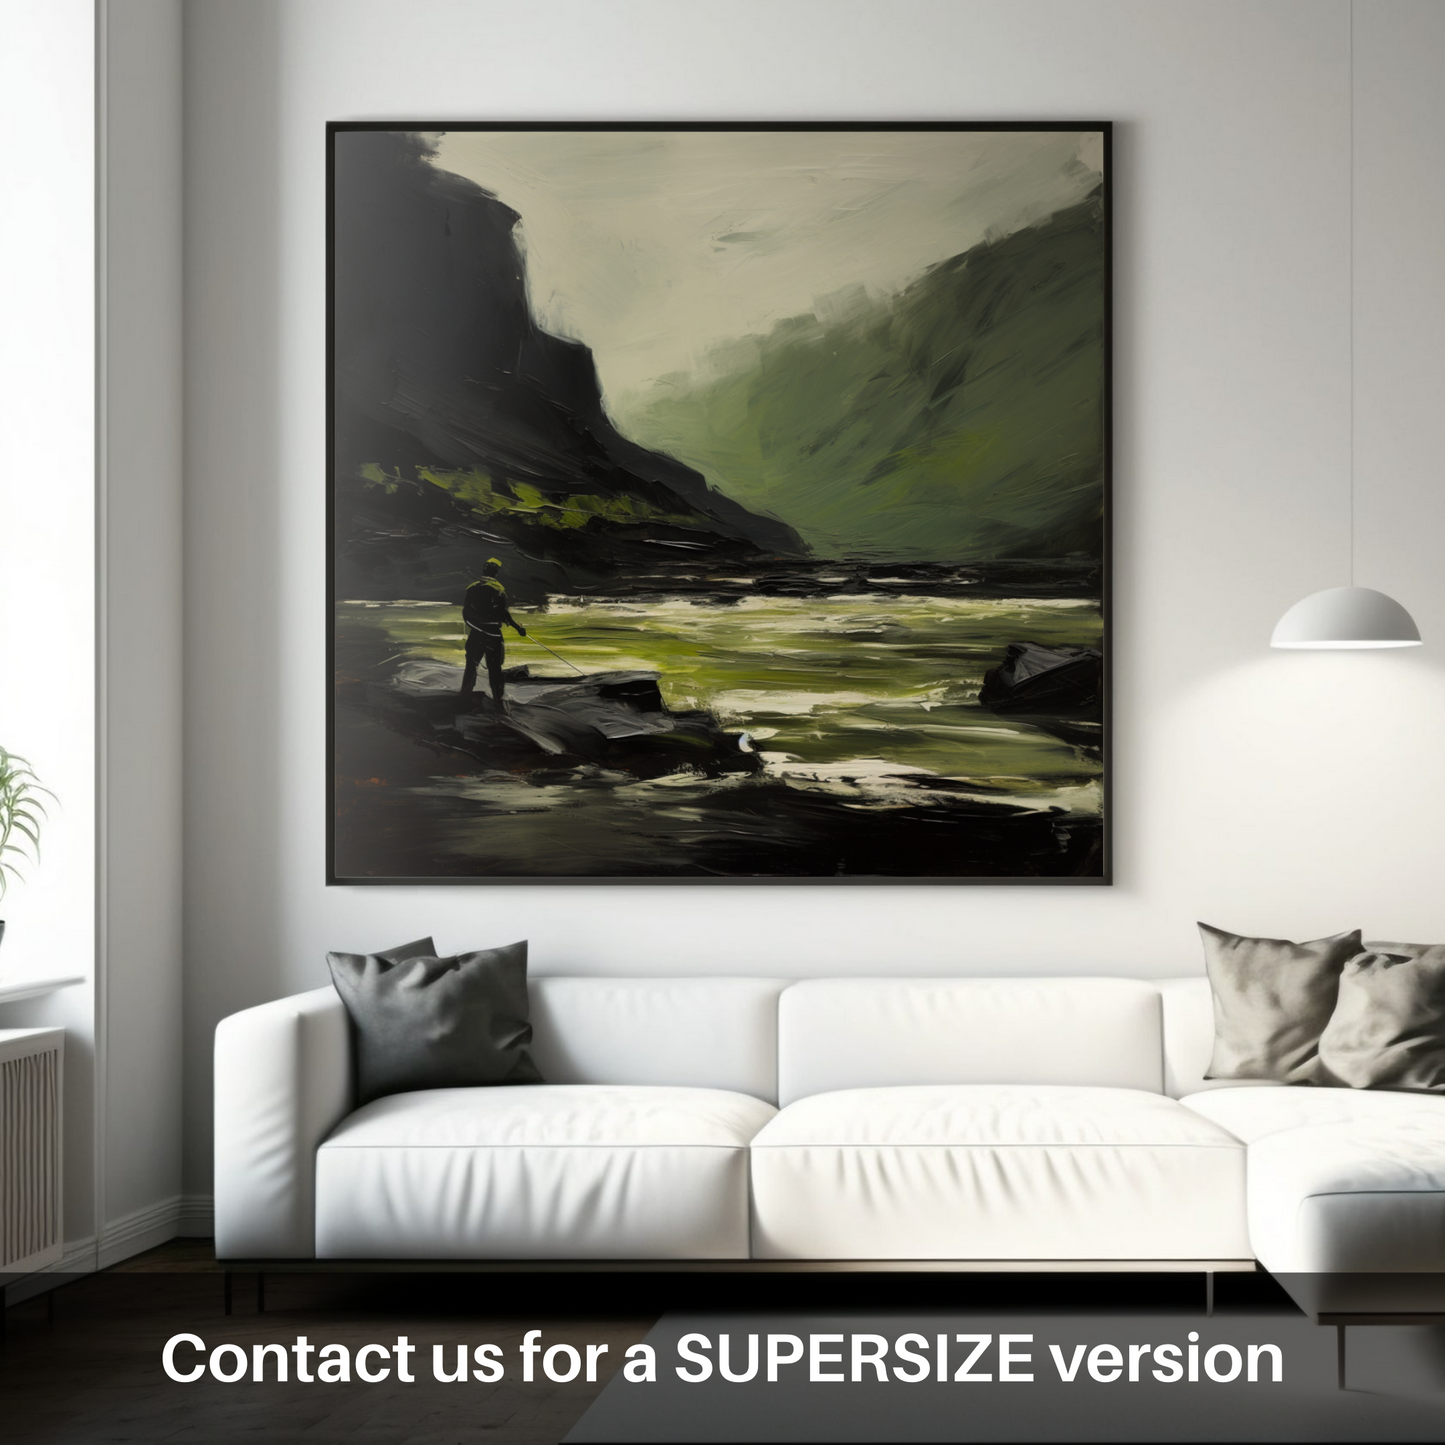 Huge supersize print of A man fishing on a Scottish River